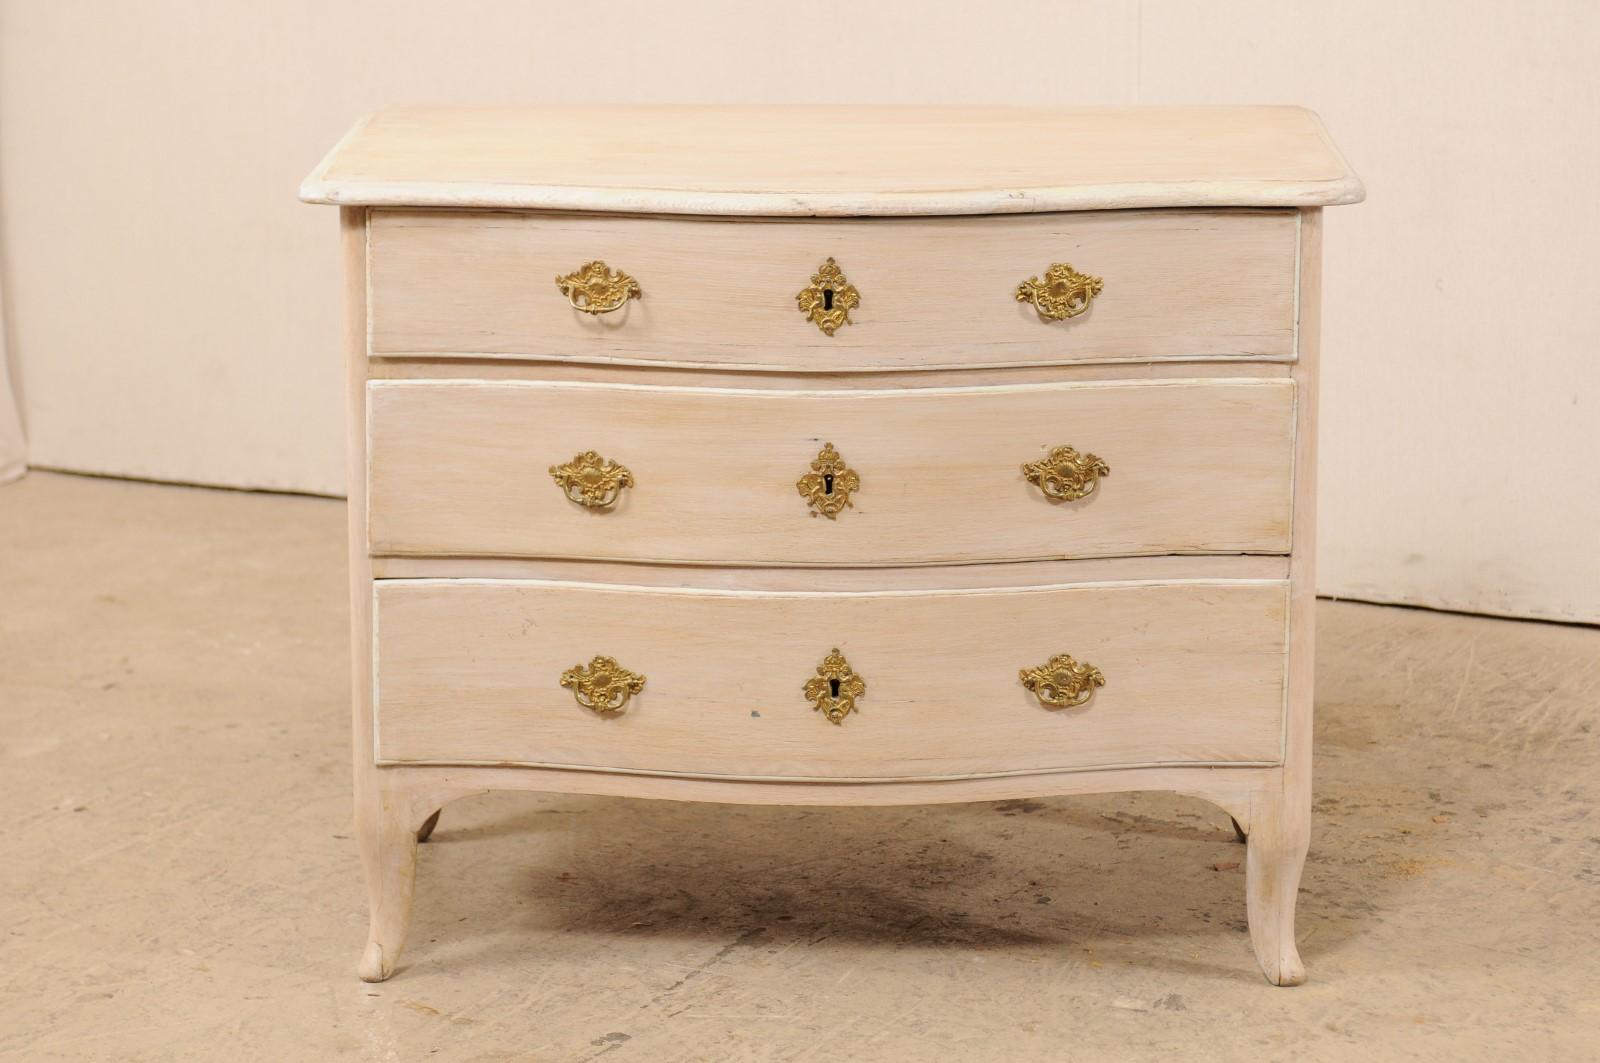 An 18th century Swedish period Rococo painted wood chest of three drawers. This antique Rococo chest from Sweden features a subtly-shaped serpentine body, a slightly overhung top which reflects the shape beneath, swag-carved side skirts with